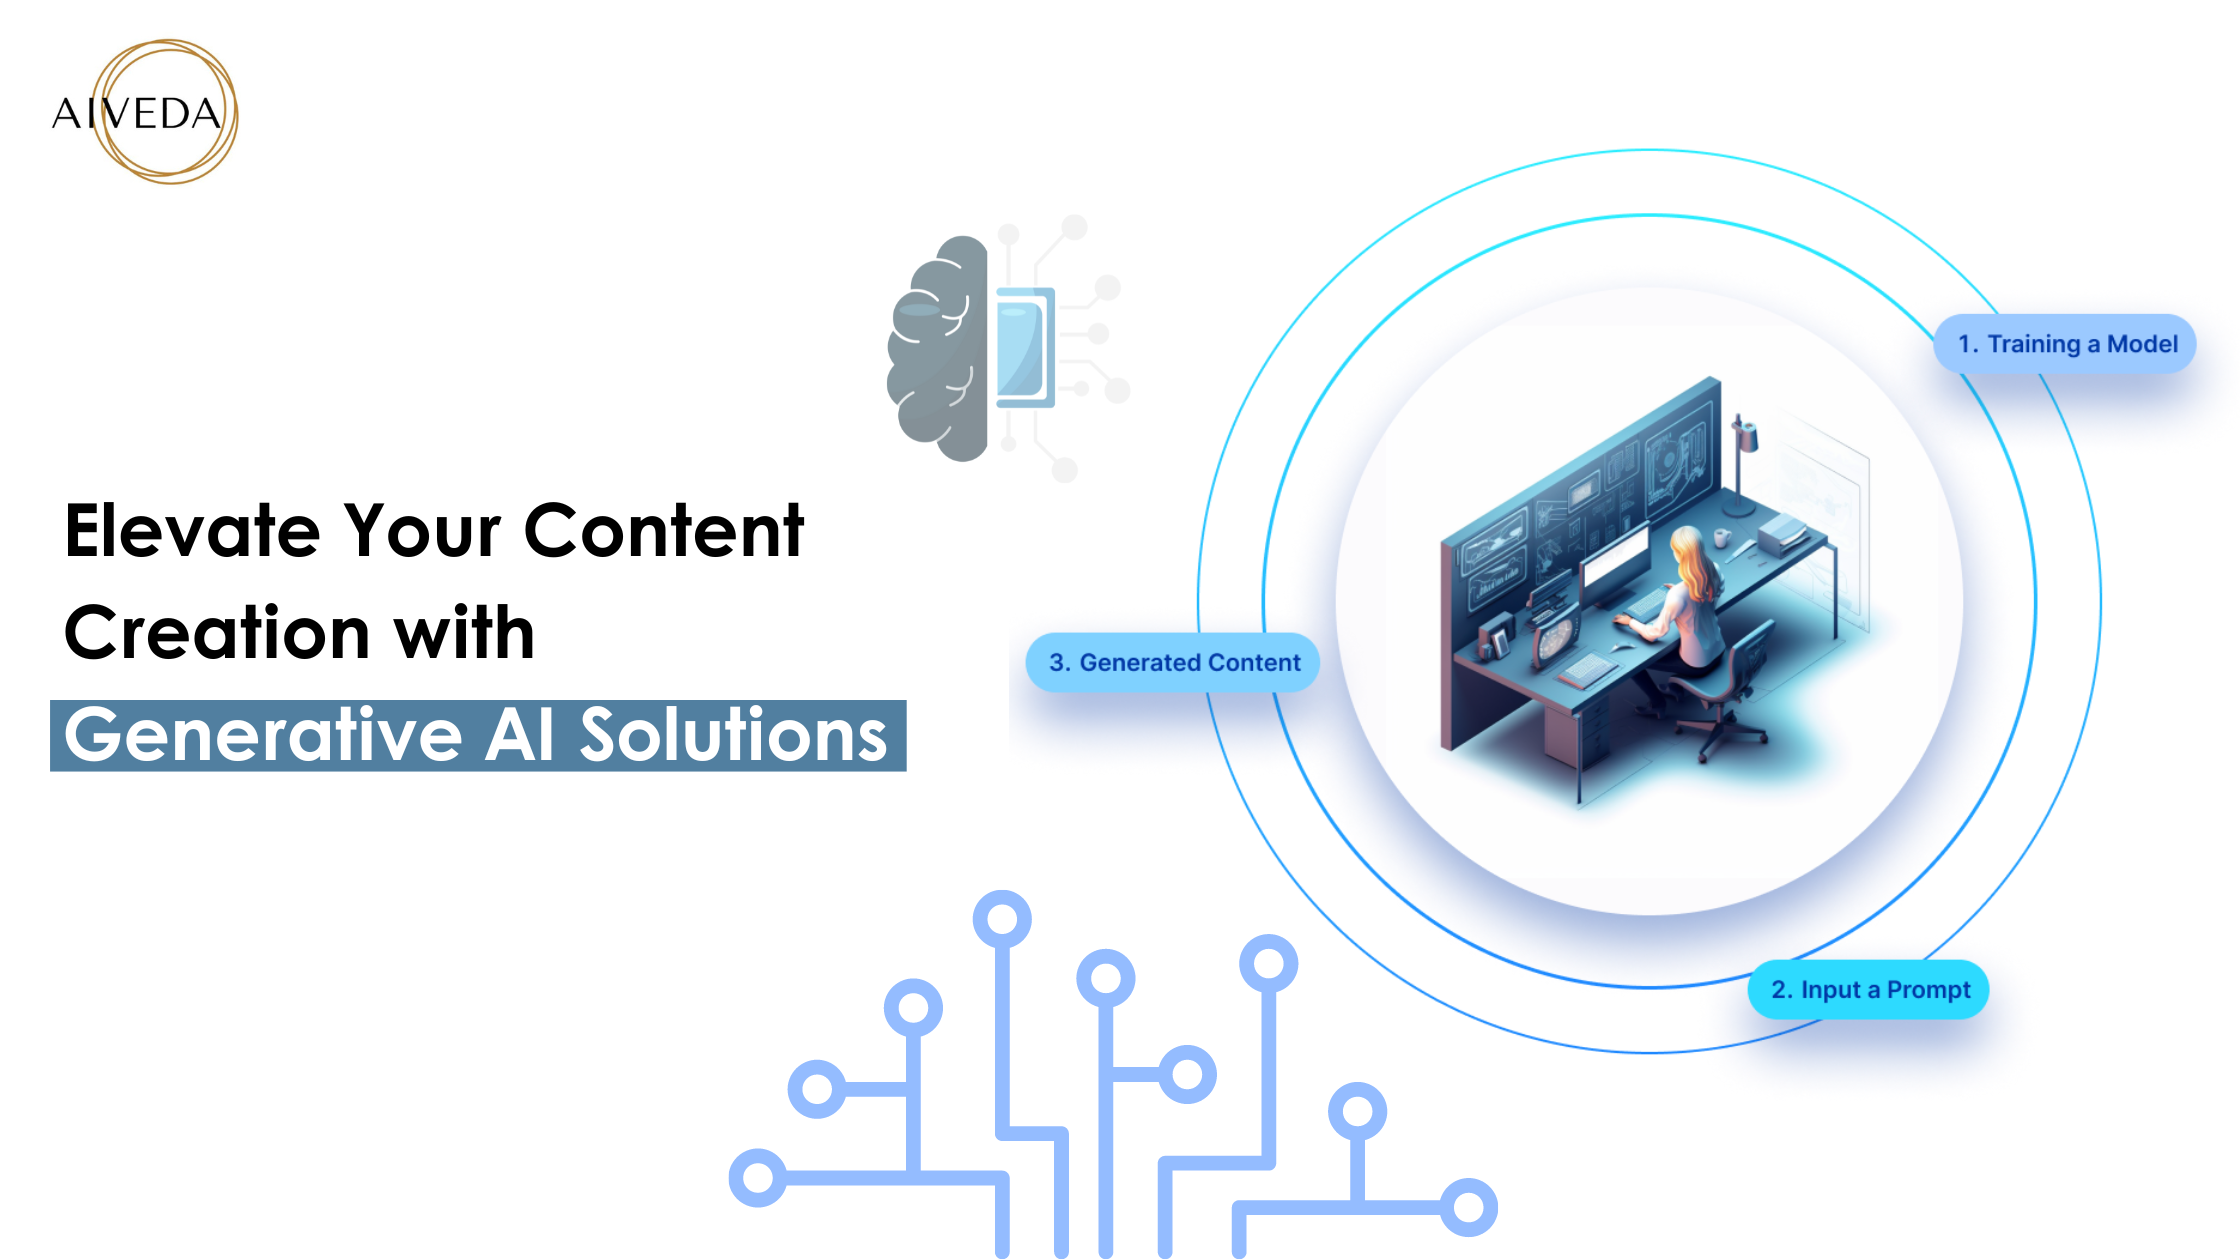 Elevate Your Content Creation with AI with Generative AI Solutions